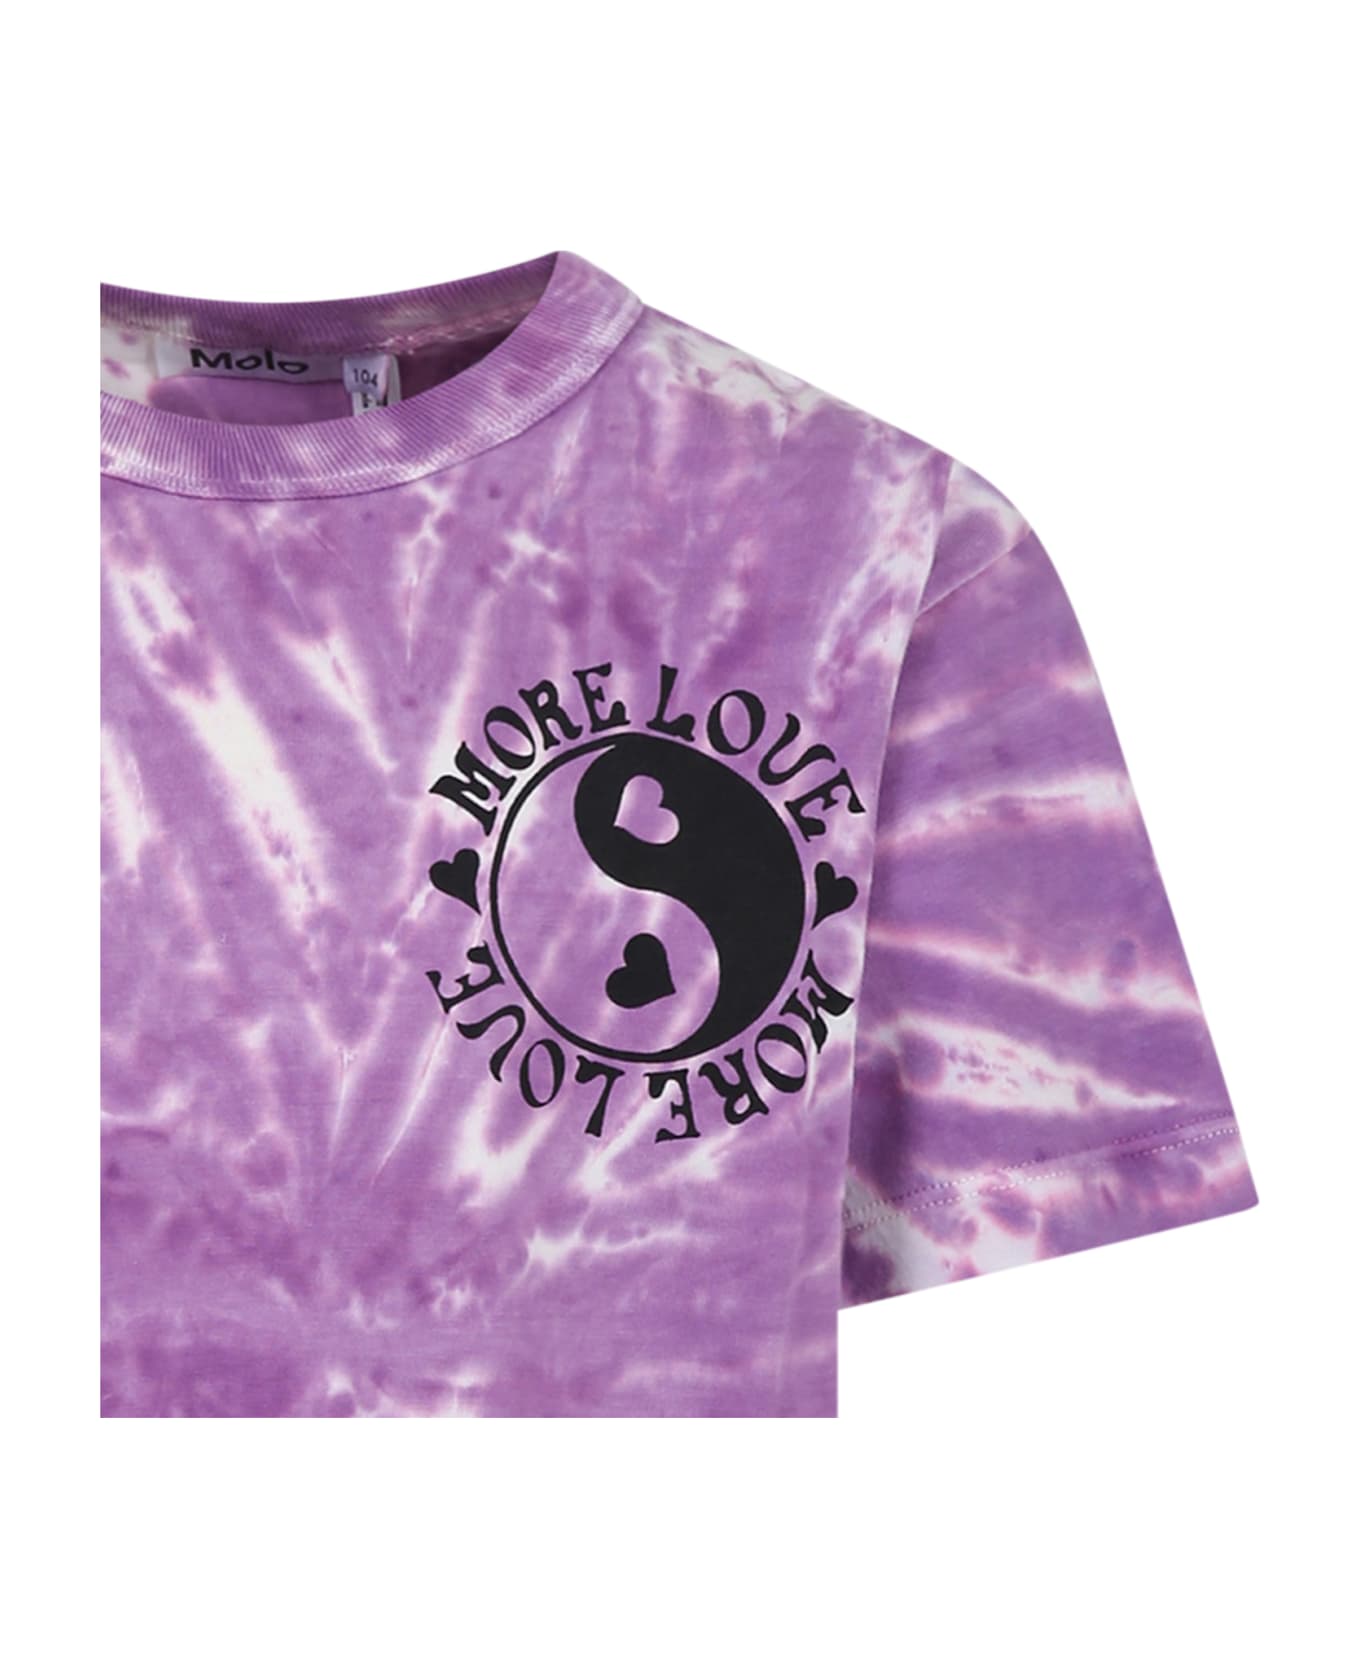 Molo Purple T-shirt For Girl With Print And Writing - Violet